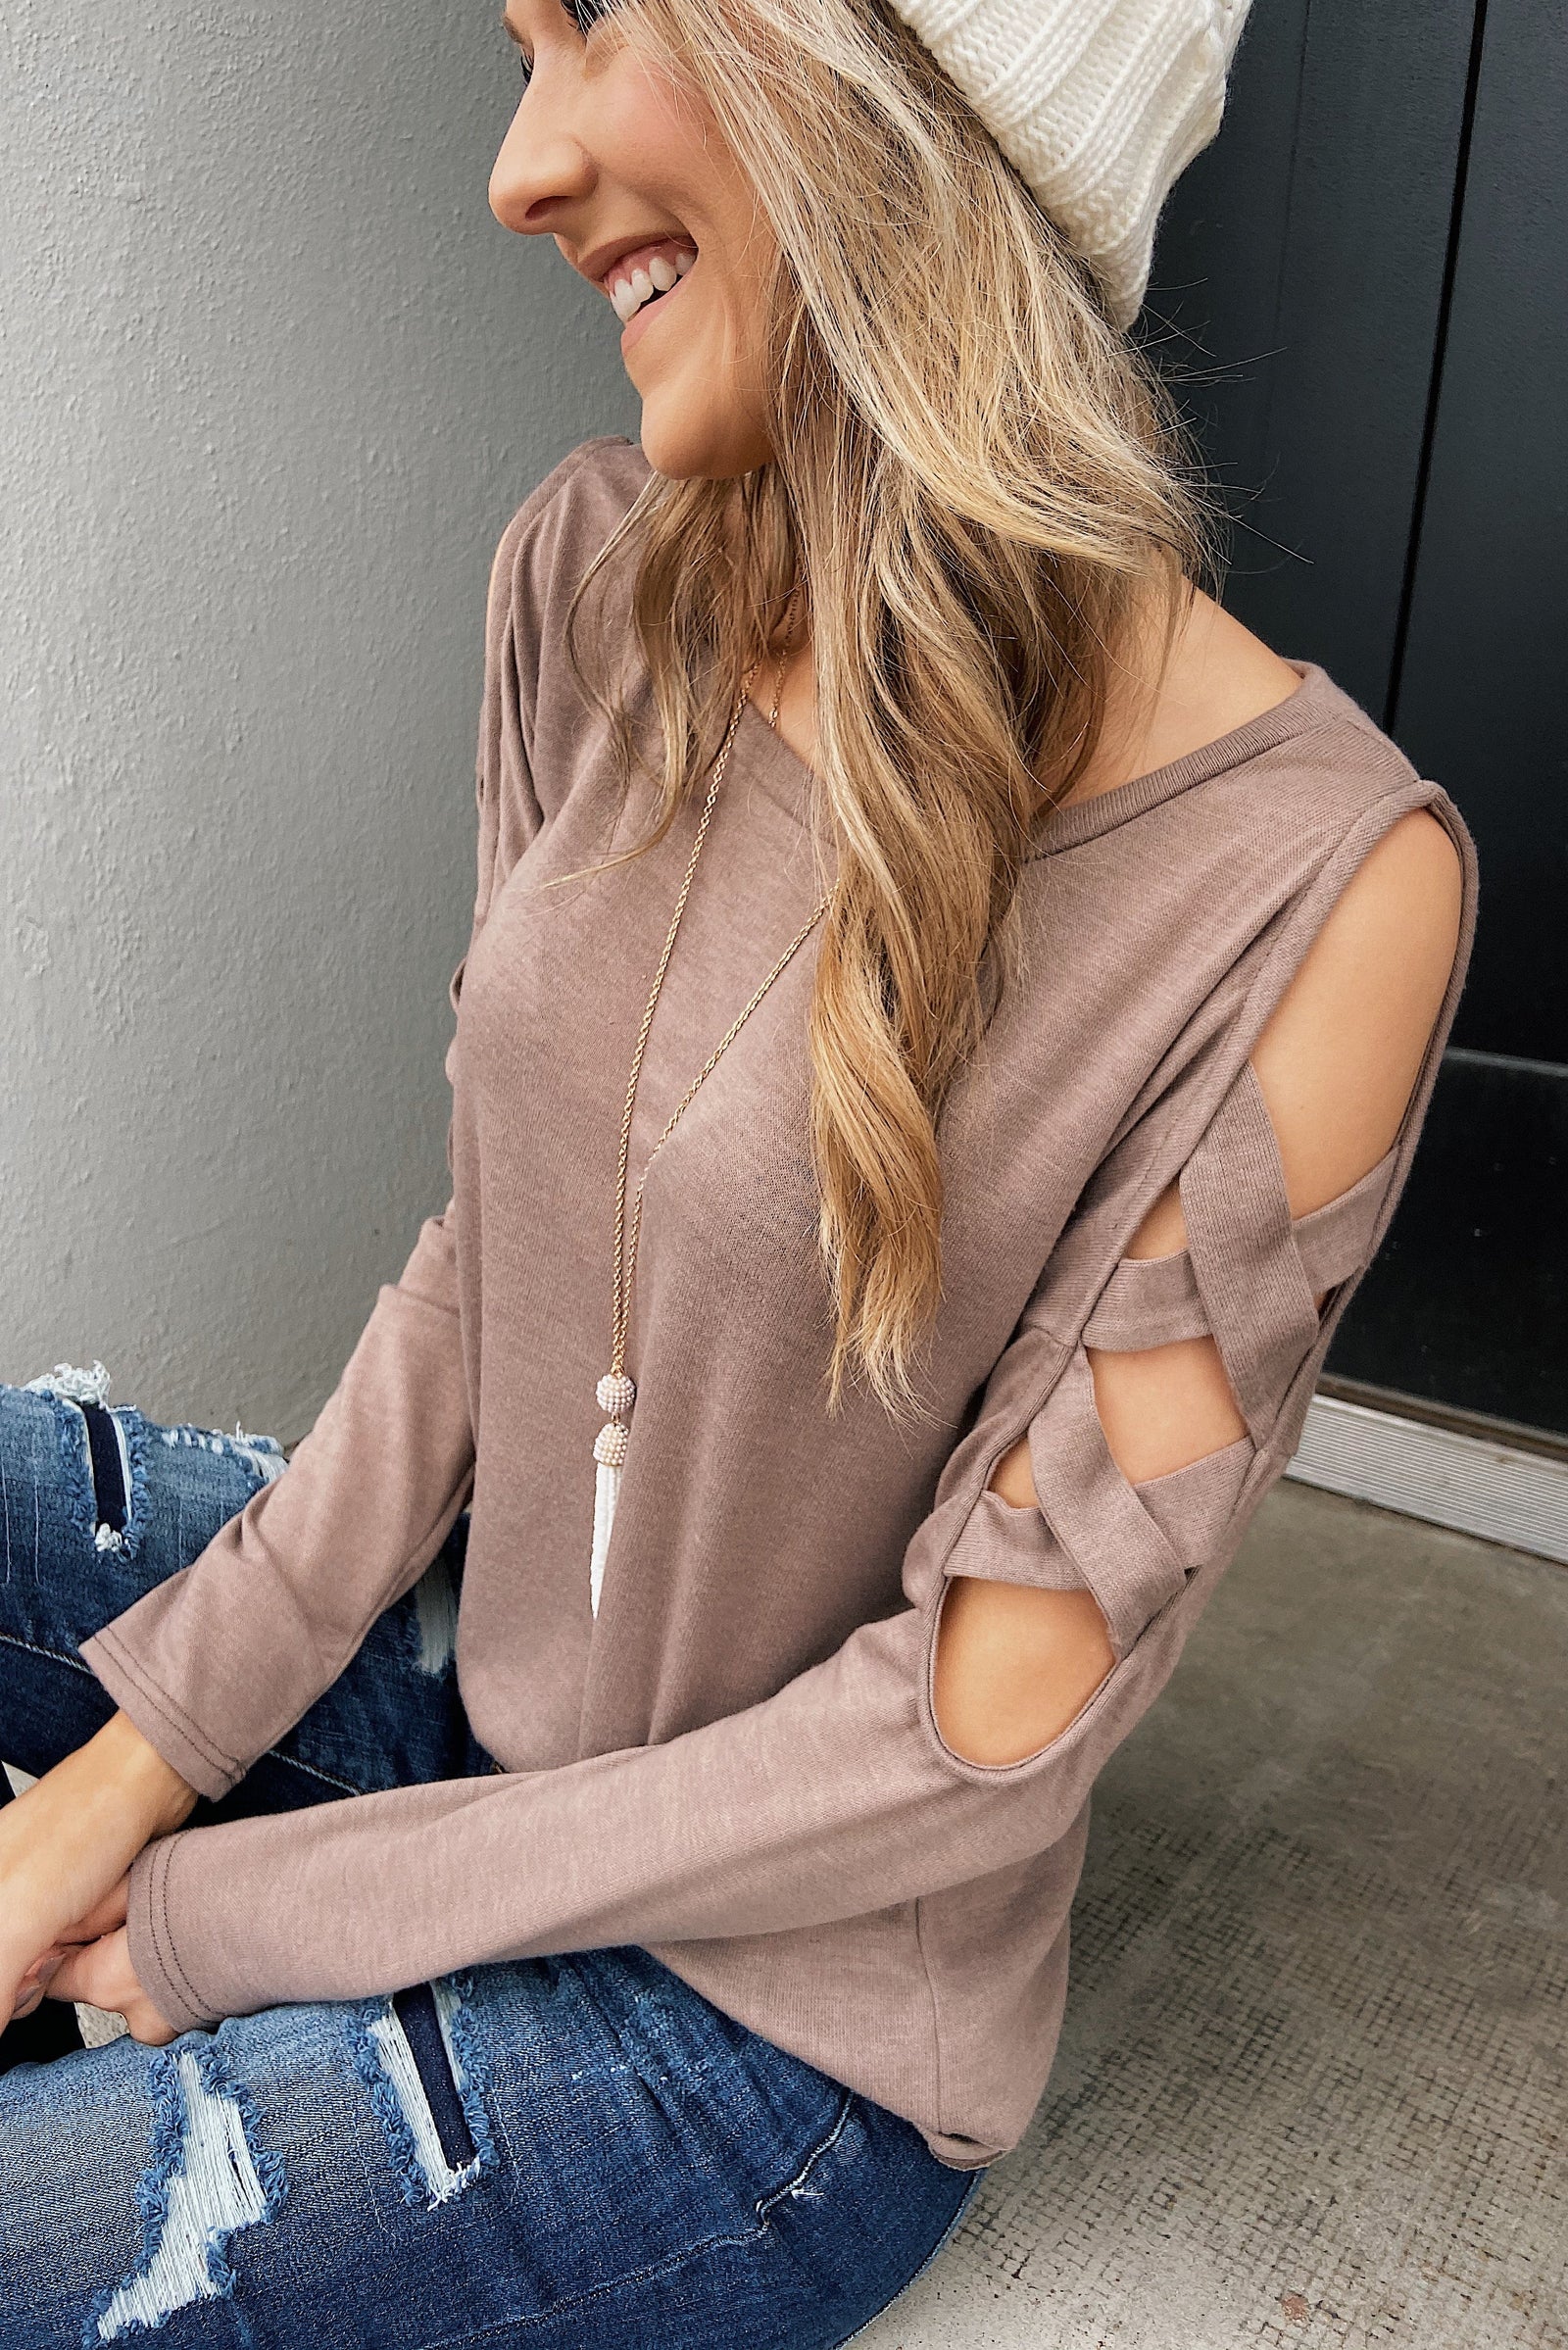 Something More Exciting Cold Shoulder Top- Mocha